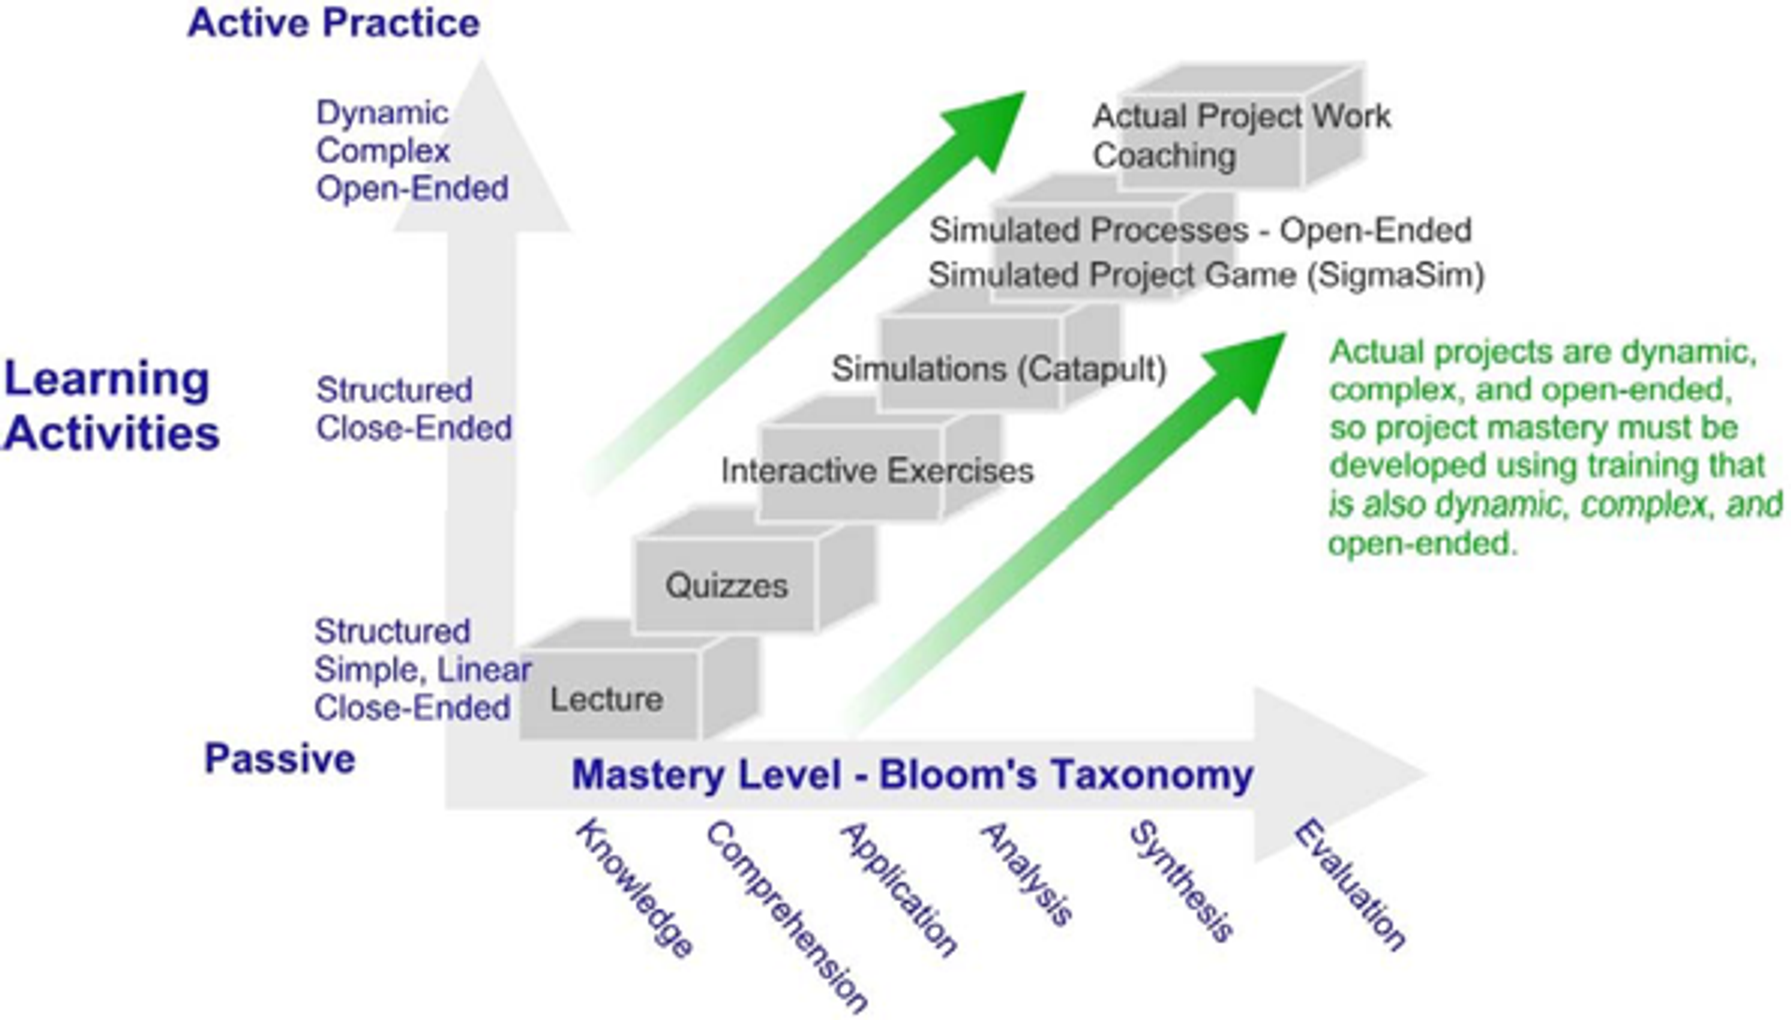 Bloom's taxonomy mapped onto learning activities